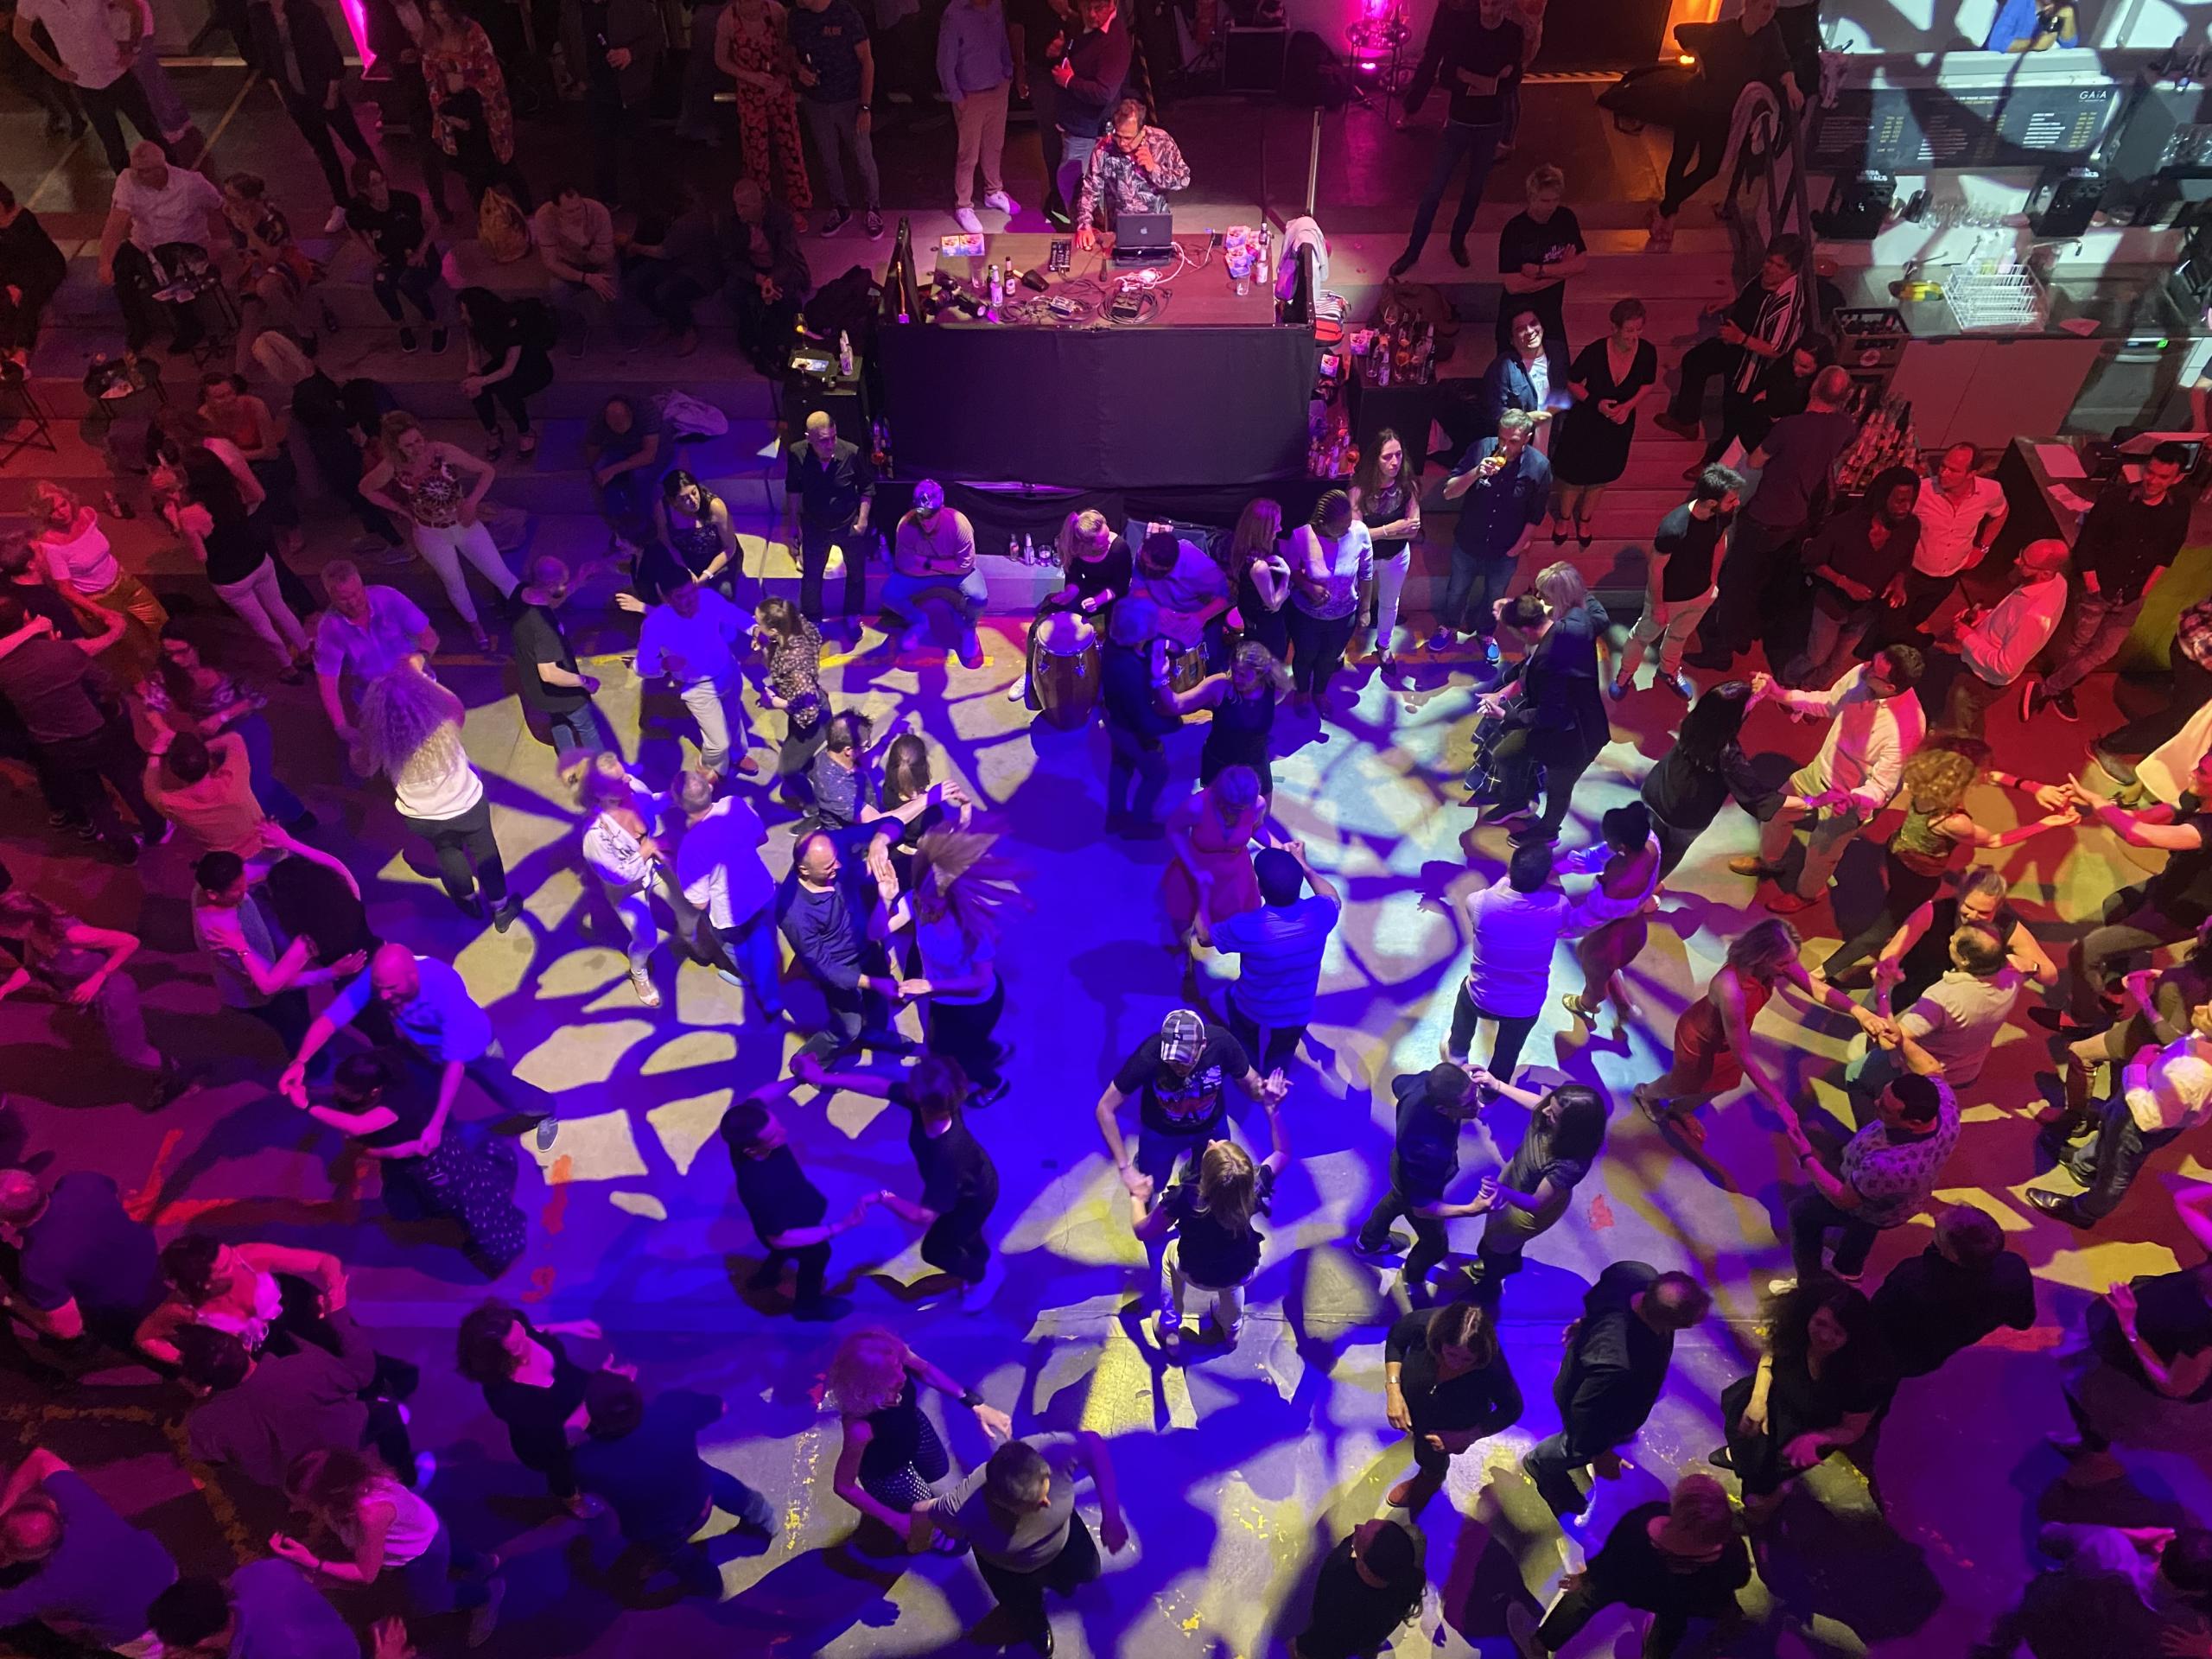 People on a colorfully lit dance floor